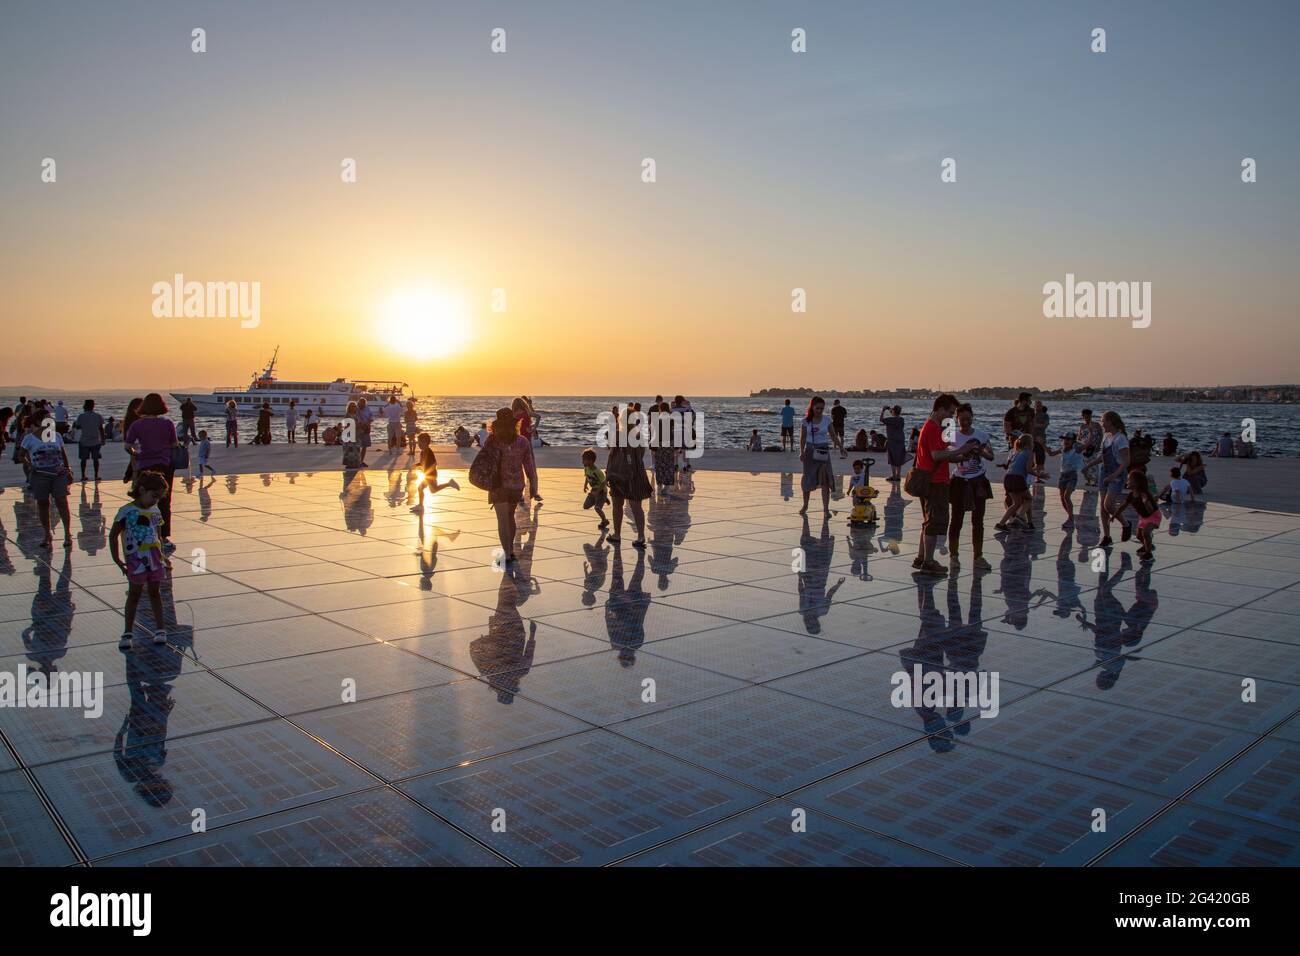 People gather on the magnificent monument to the sun at sunset, Zadar, Zadar, Croatia, Europe Stock Photo